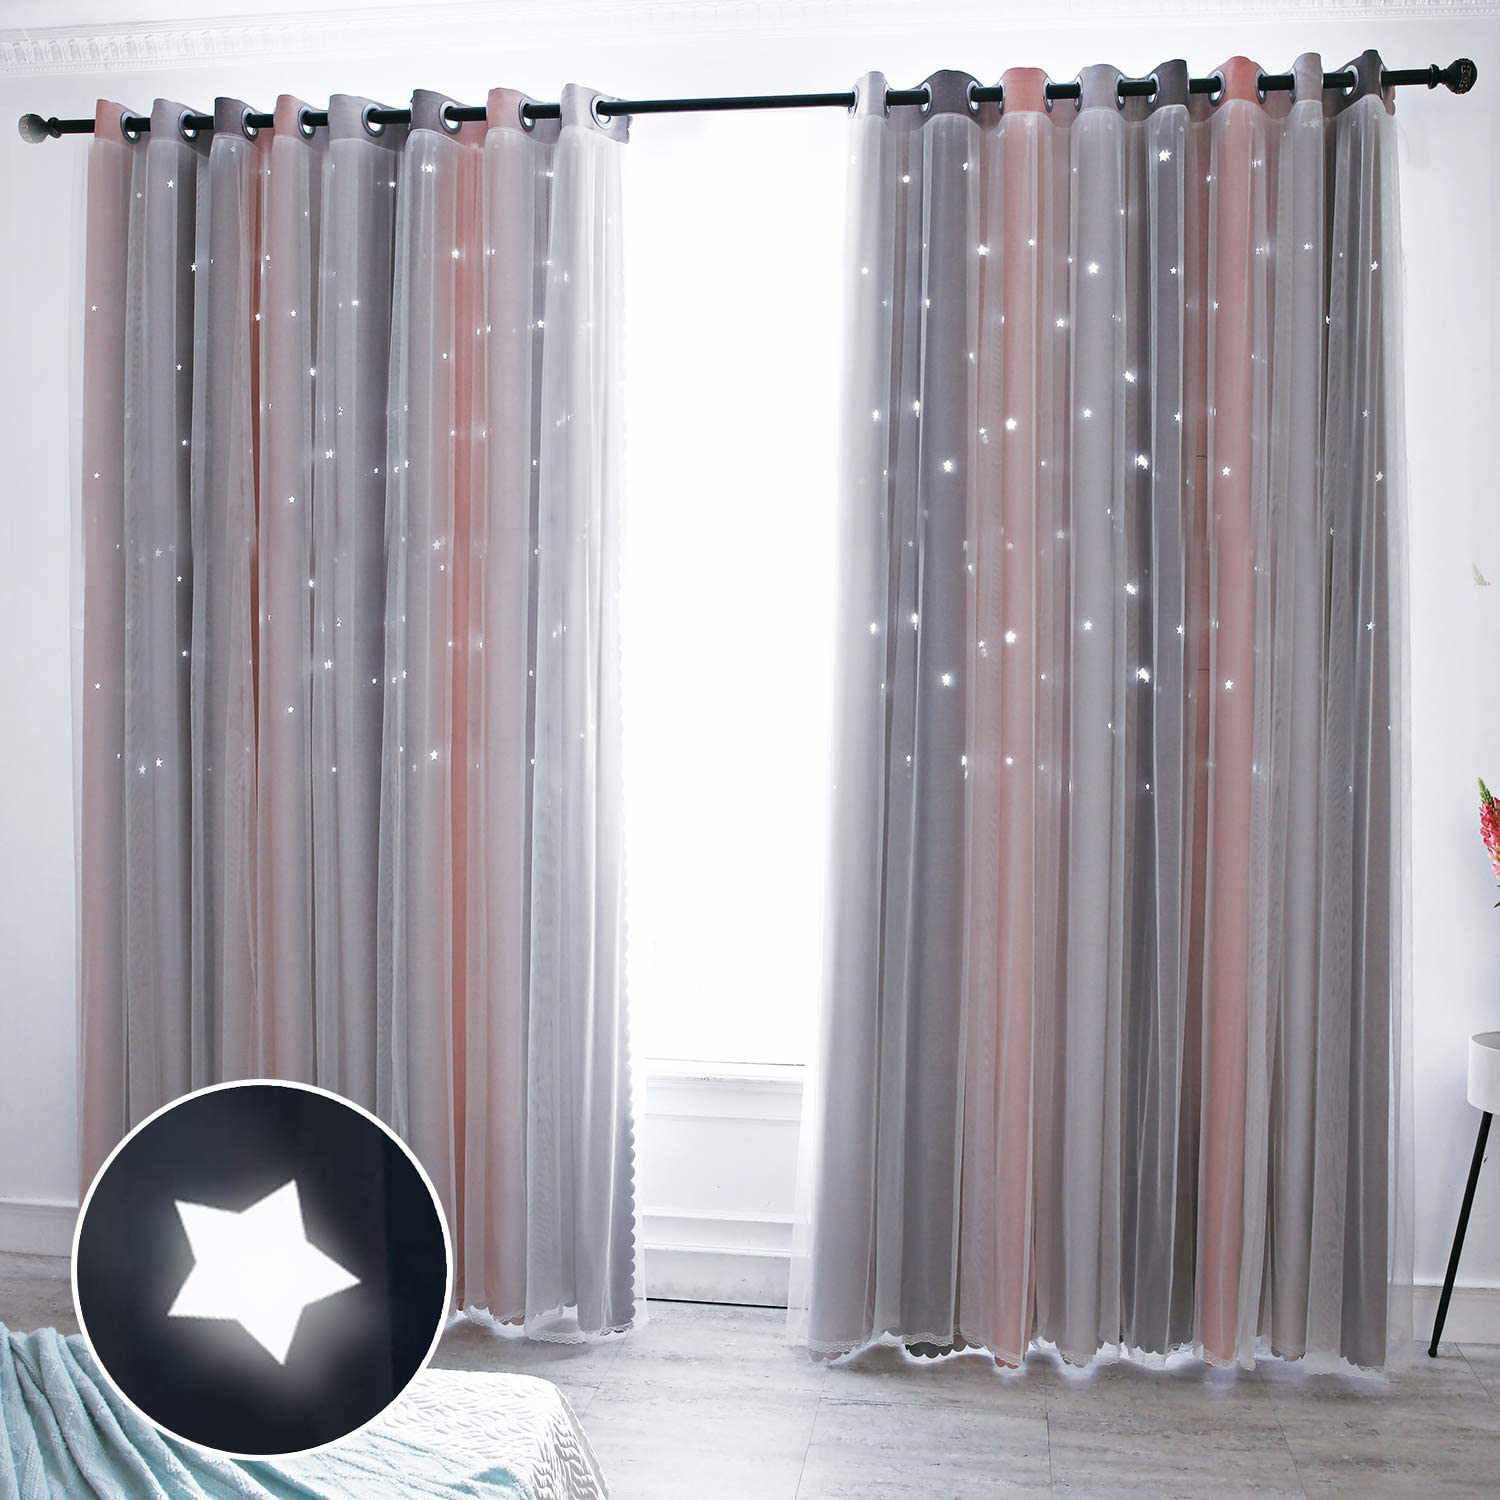 The 9 Best Blackout Curtains Of 2021 According To Reviews Real Simple